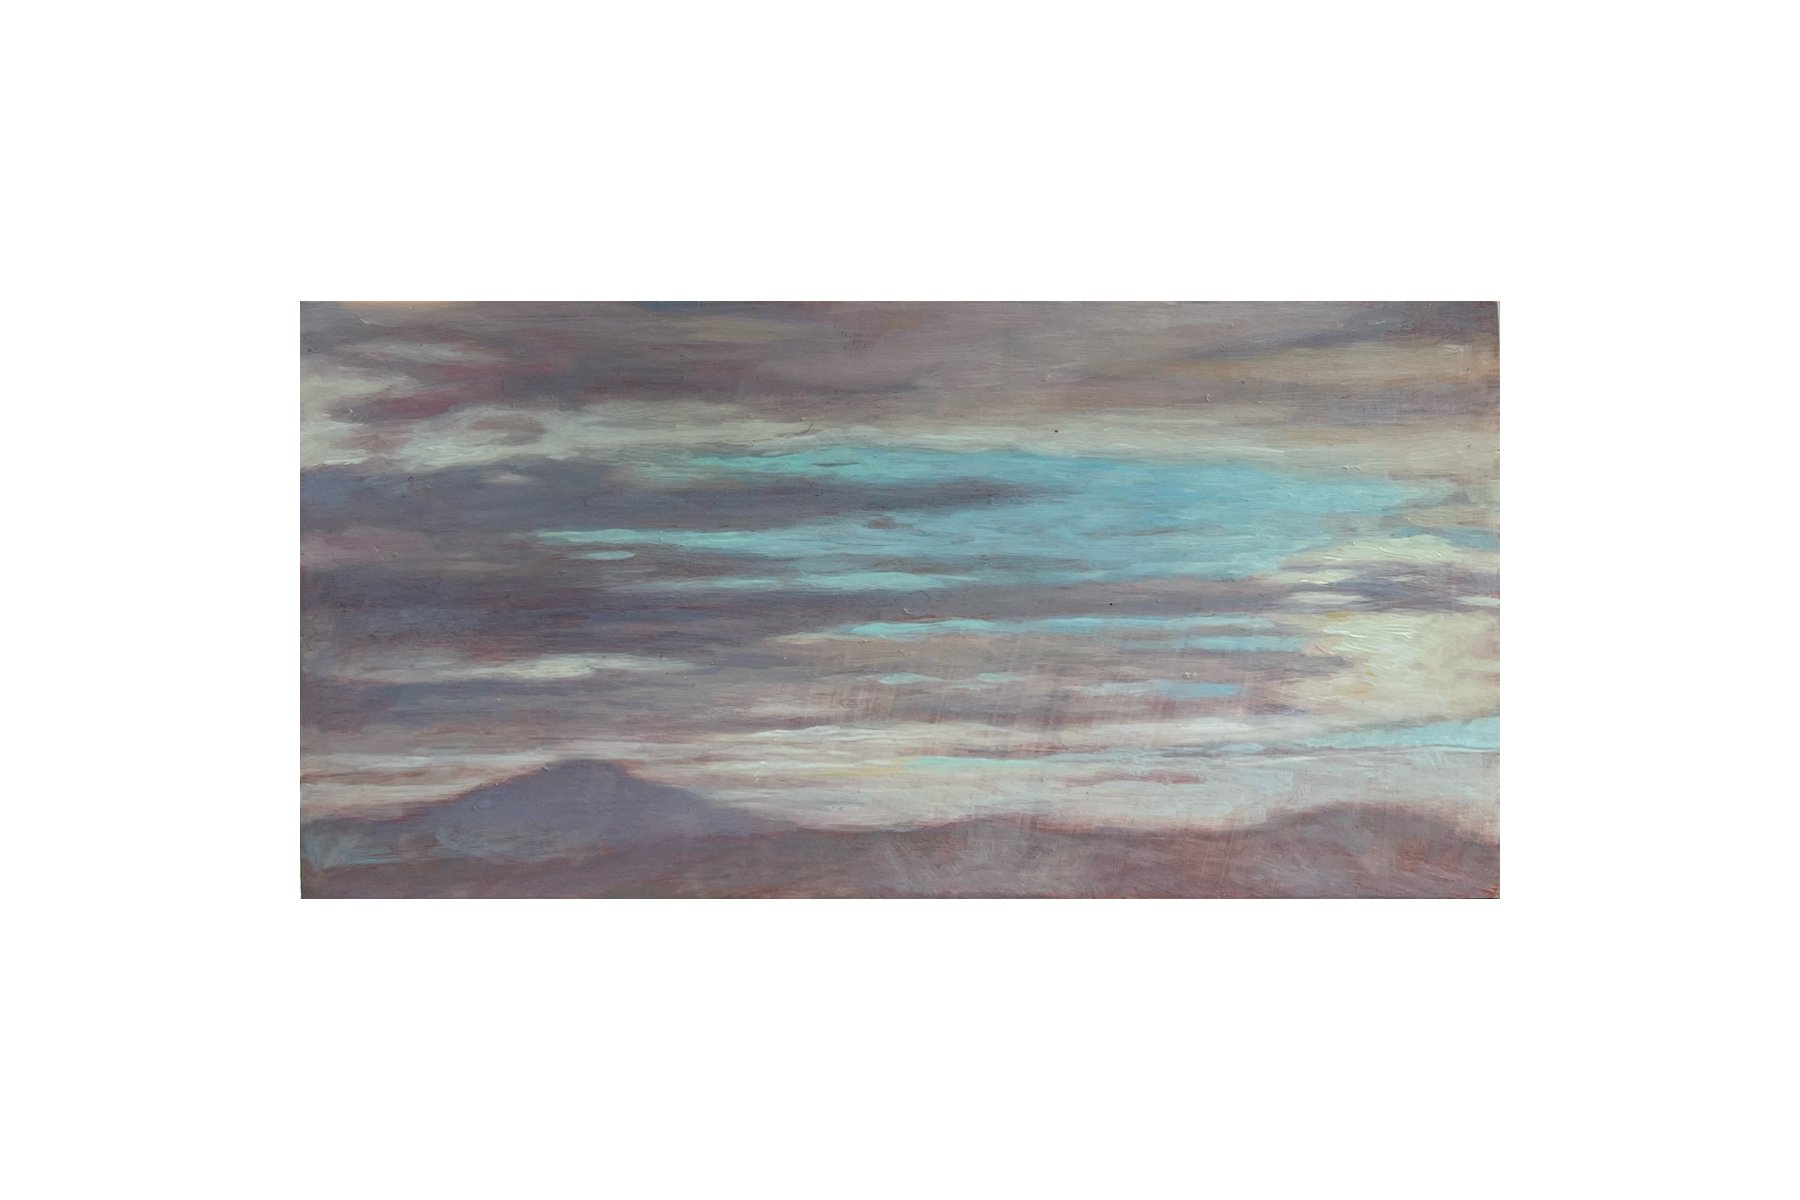 Foothills Clouds by Maura Carta